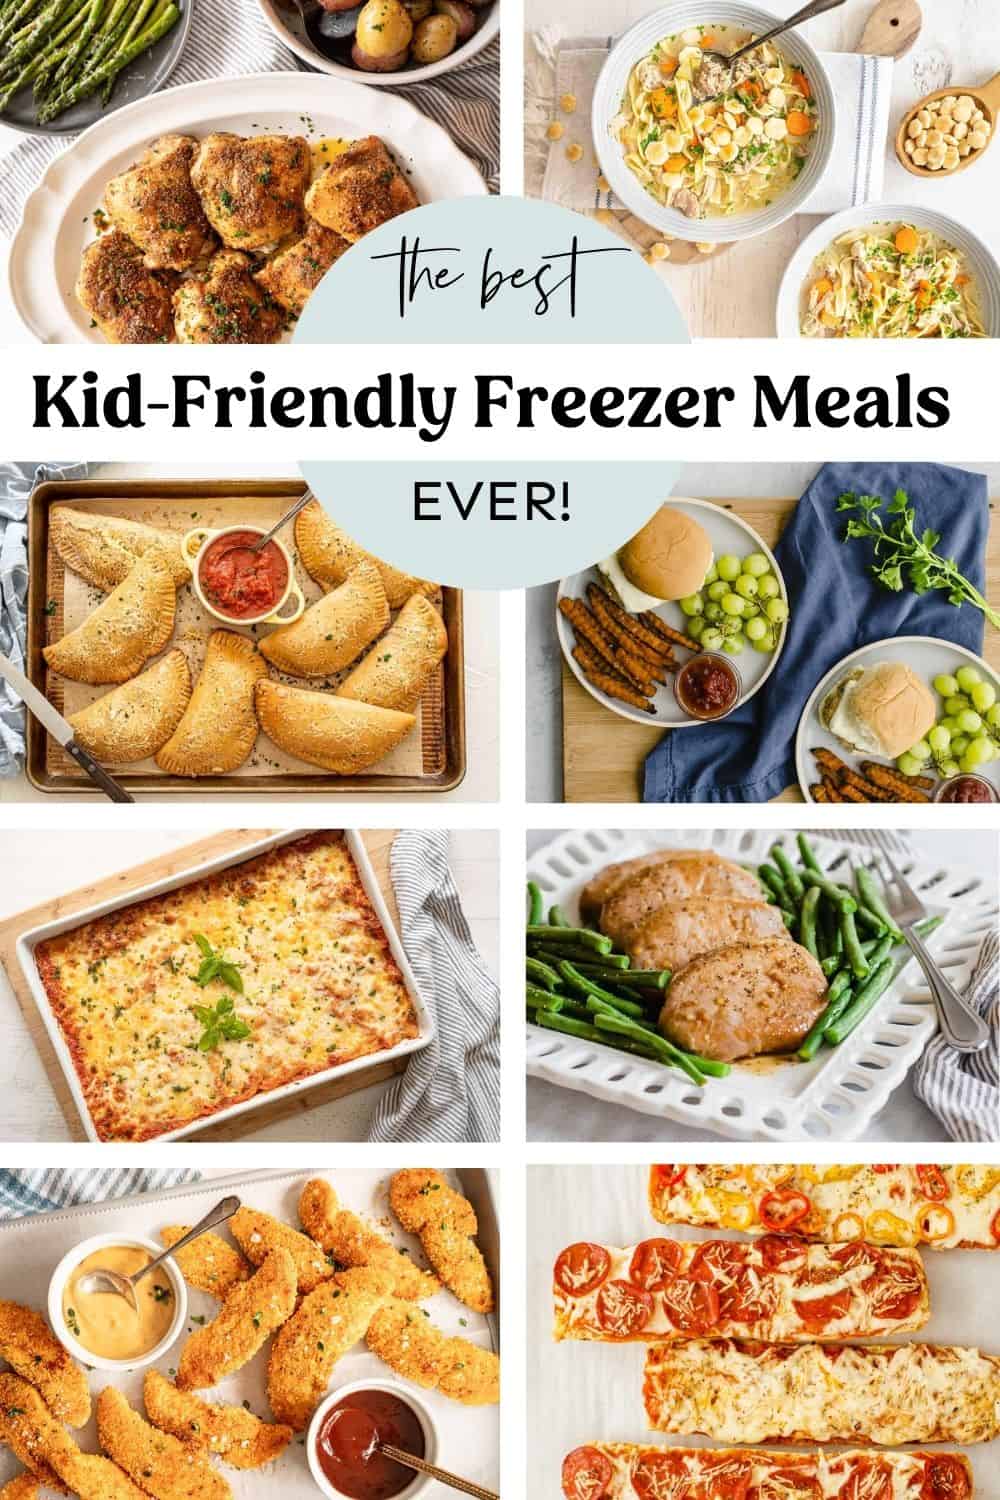 A collage of kid-friendly freezer meals.